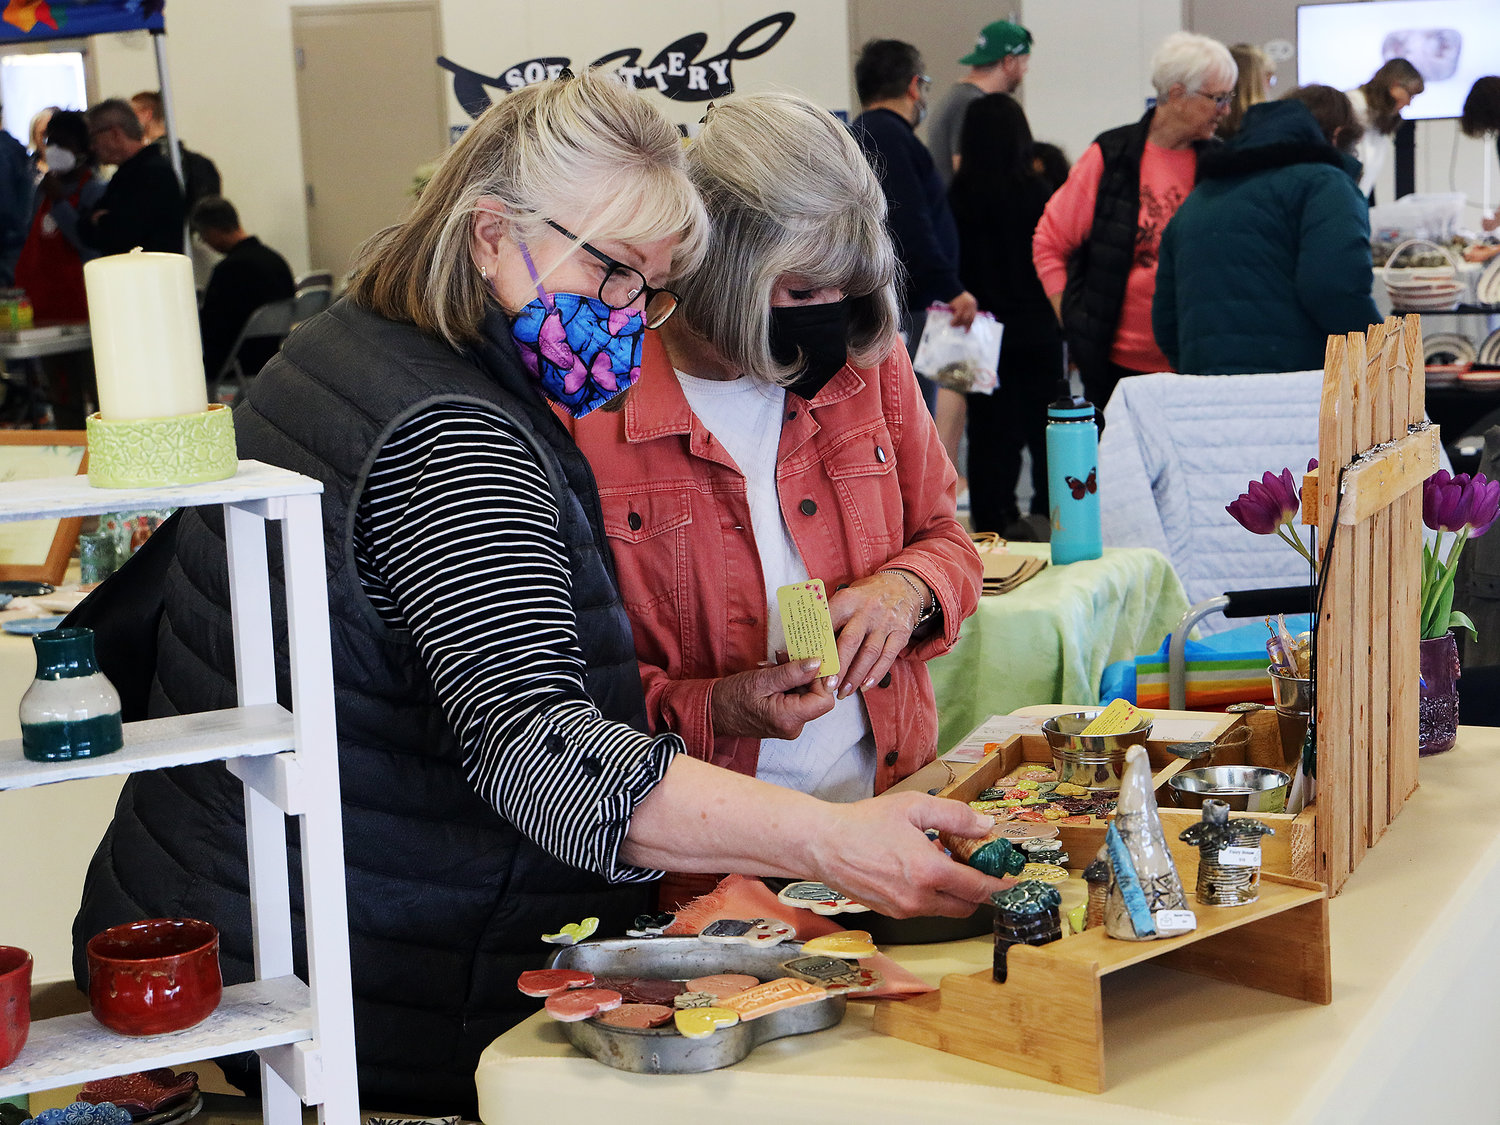 Vendor booths offered a variety of goods during the birding expo on March 18.